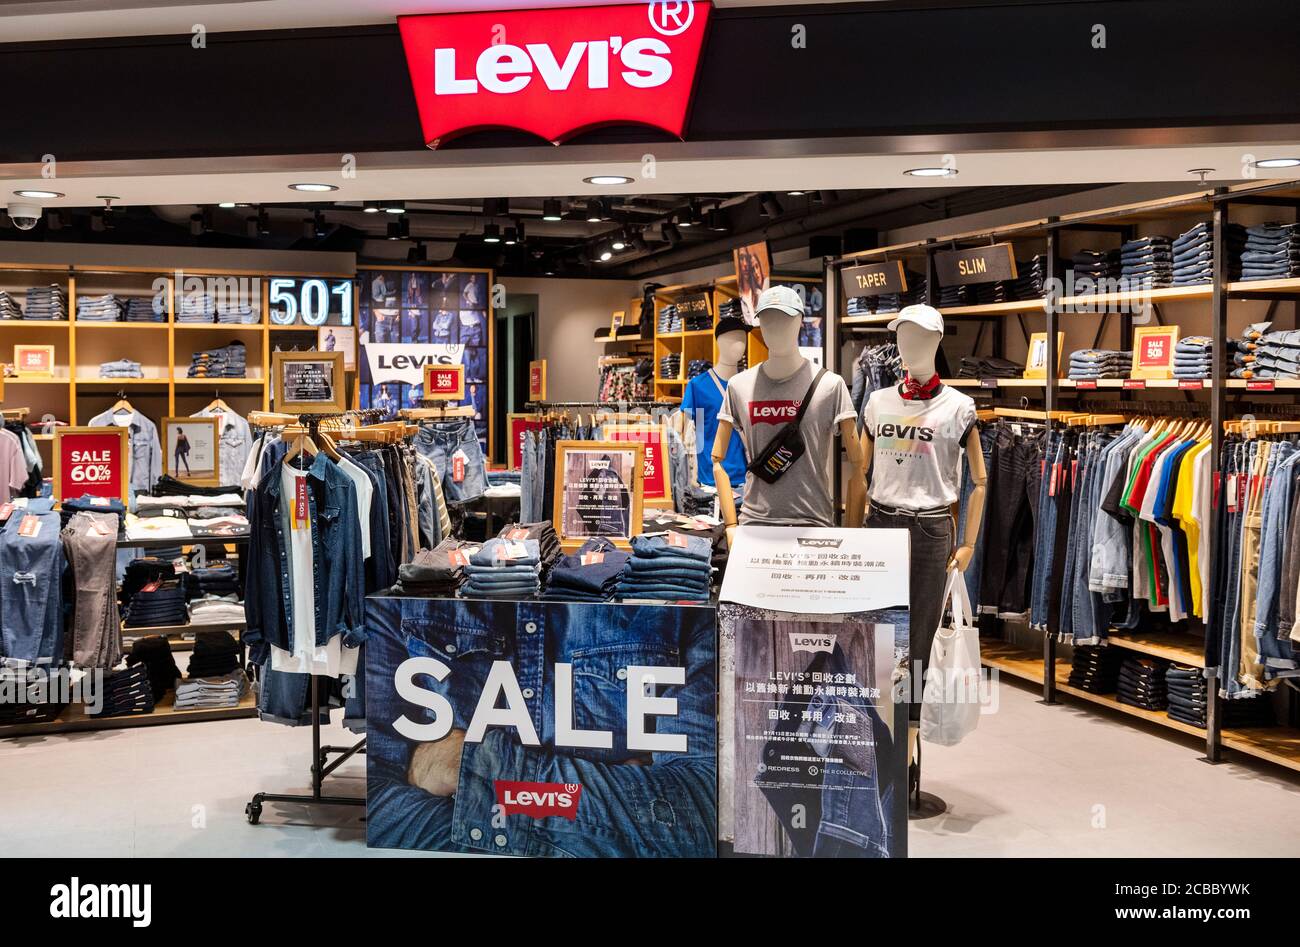 American clothing company brand Levi´s store seen in Hong Kong Stock Photo  - Alamy